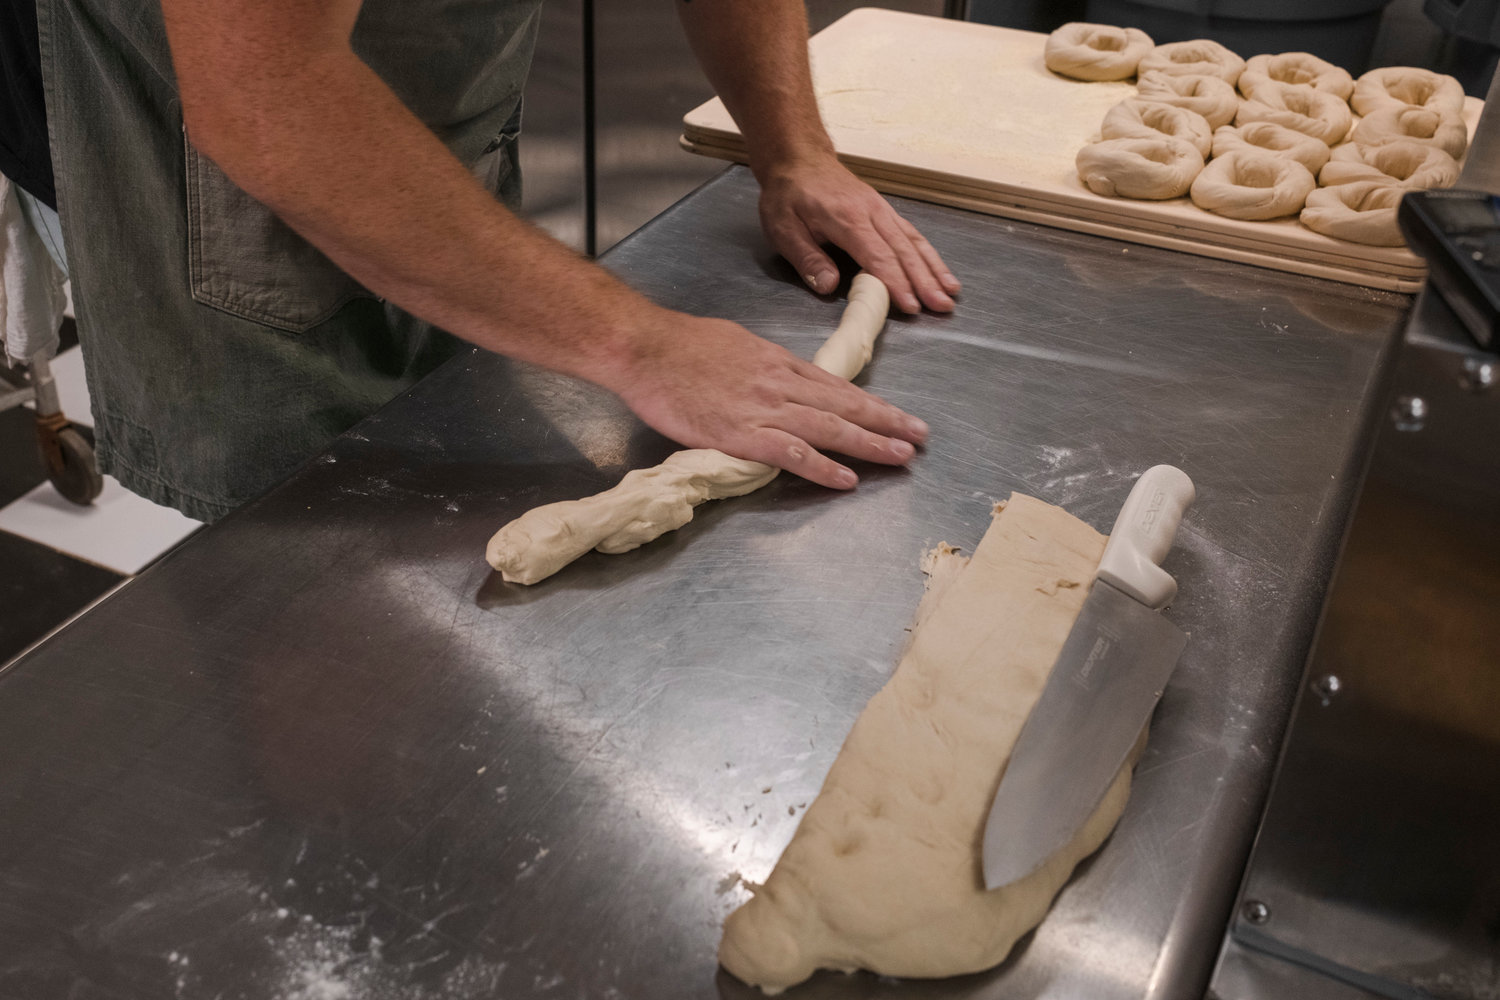 He jokes that he needs someone with smaller hands to roll the bagels so he can get more out of a batch.